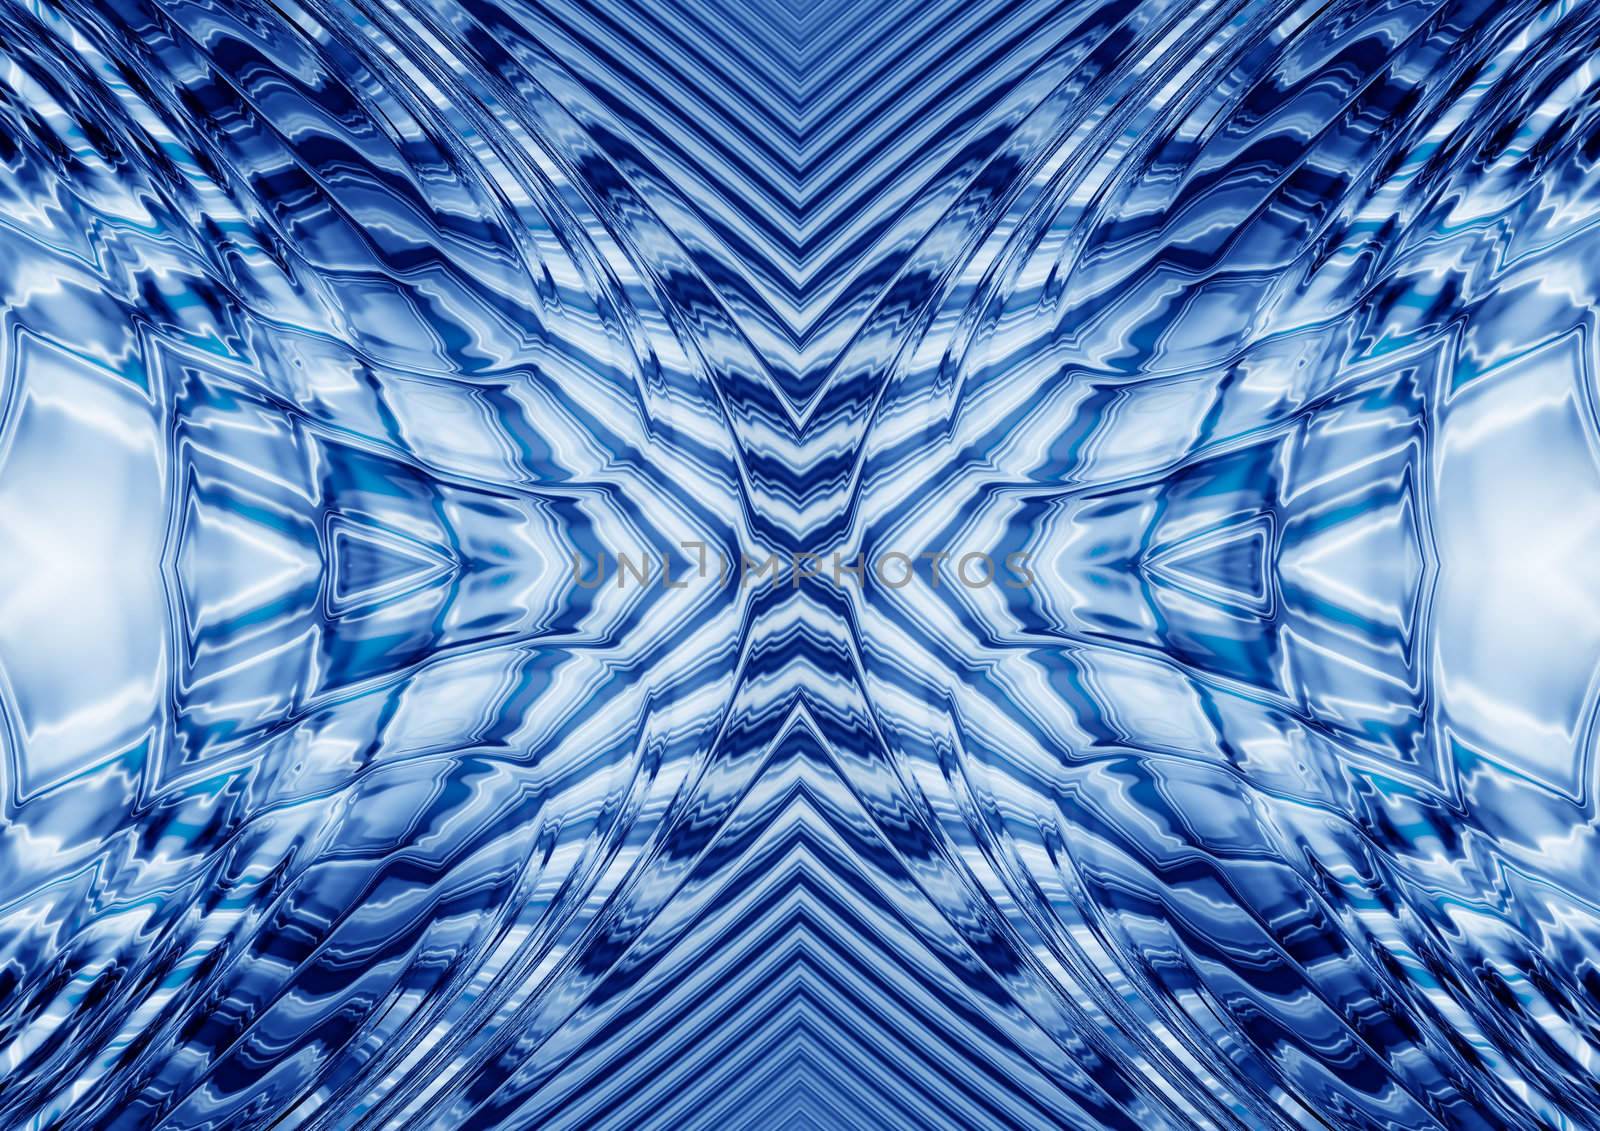 rippled abstract kaleidoscopic background